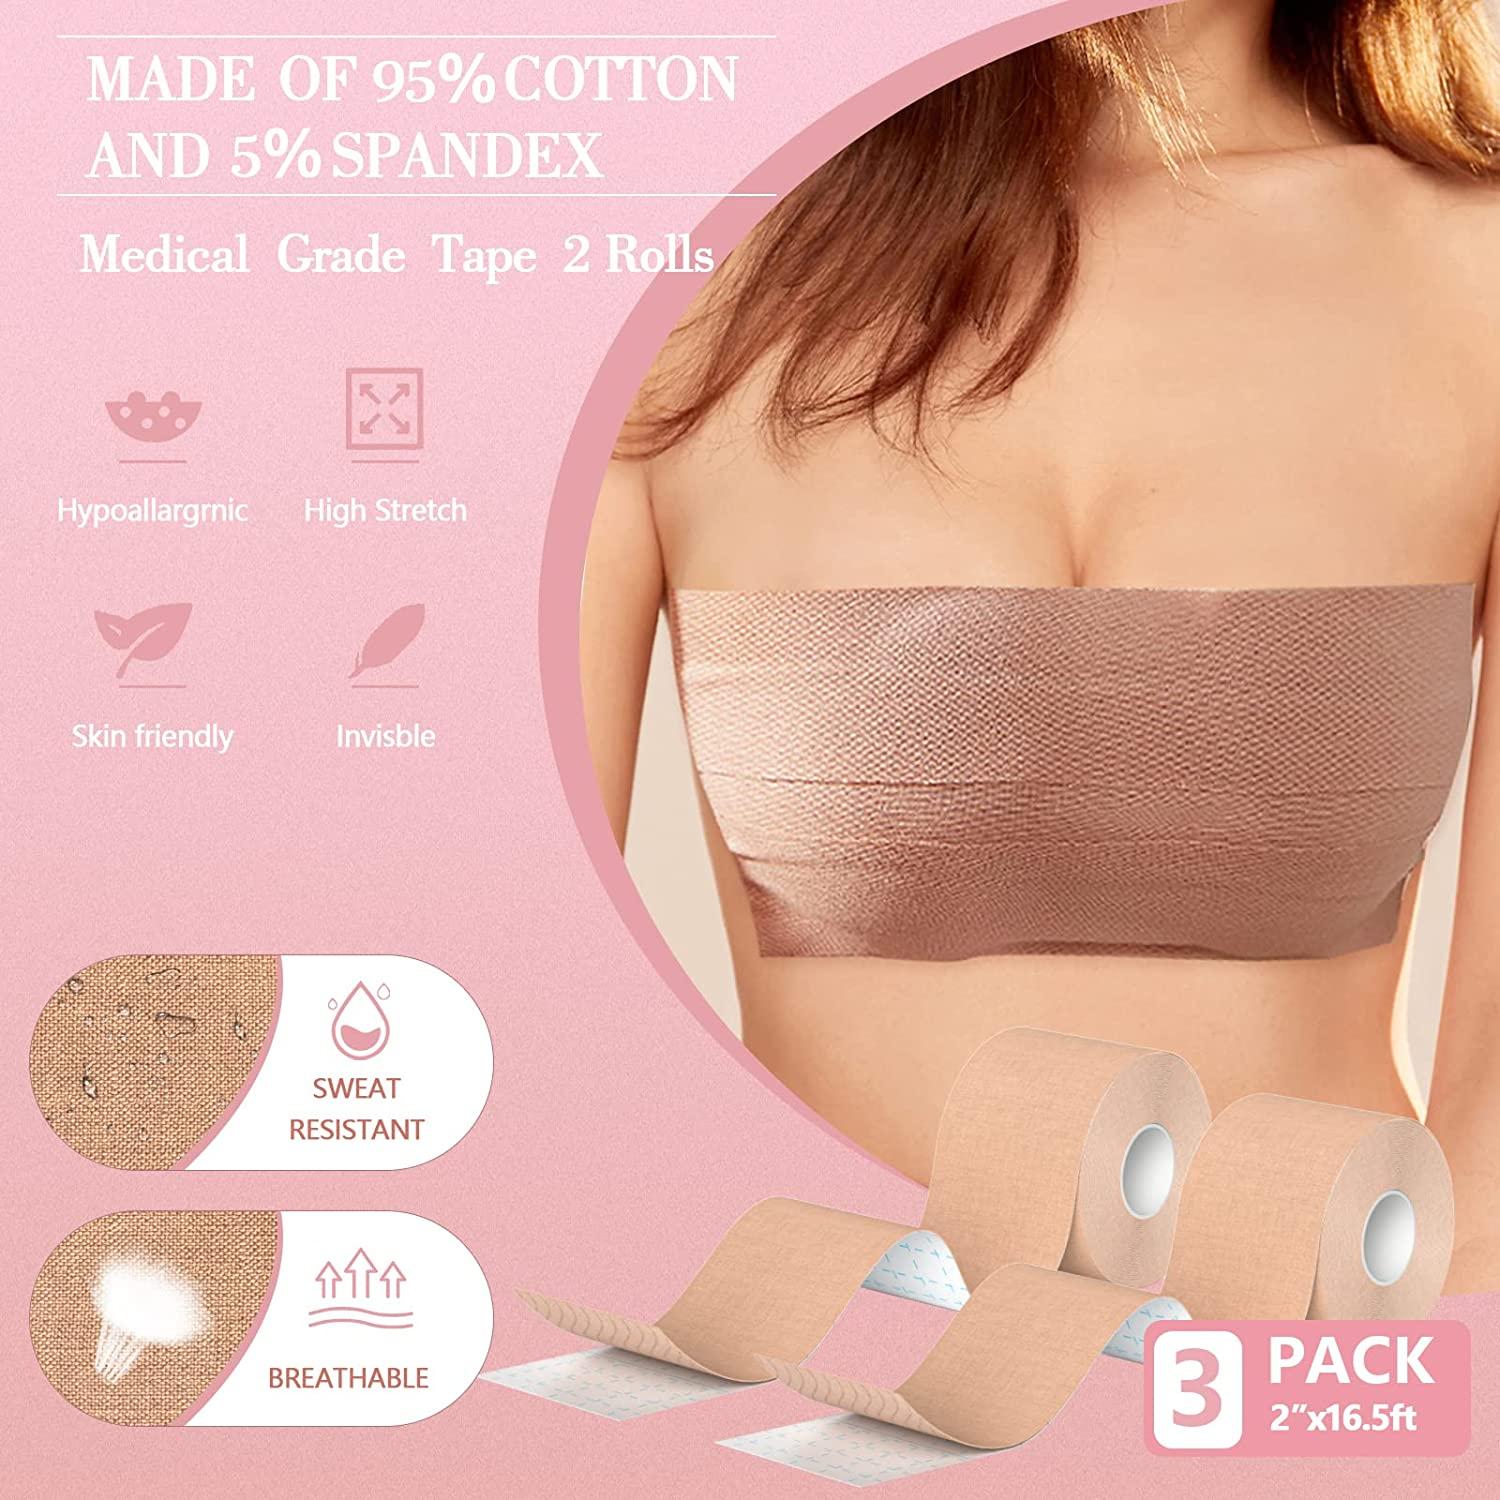 CAURO 3 Pcs Boob Tape for Contour Lift & Fashion, Boobytape Bra Alternative  of Breasts, Body Bob Tape for Large Breasts & Push up in All Clothing  Fabric Dress Types, Waterproof Sweat-proof